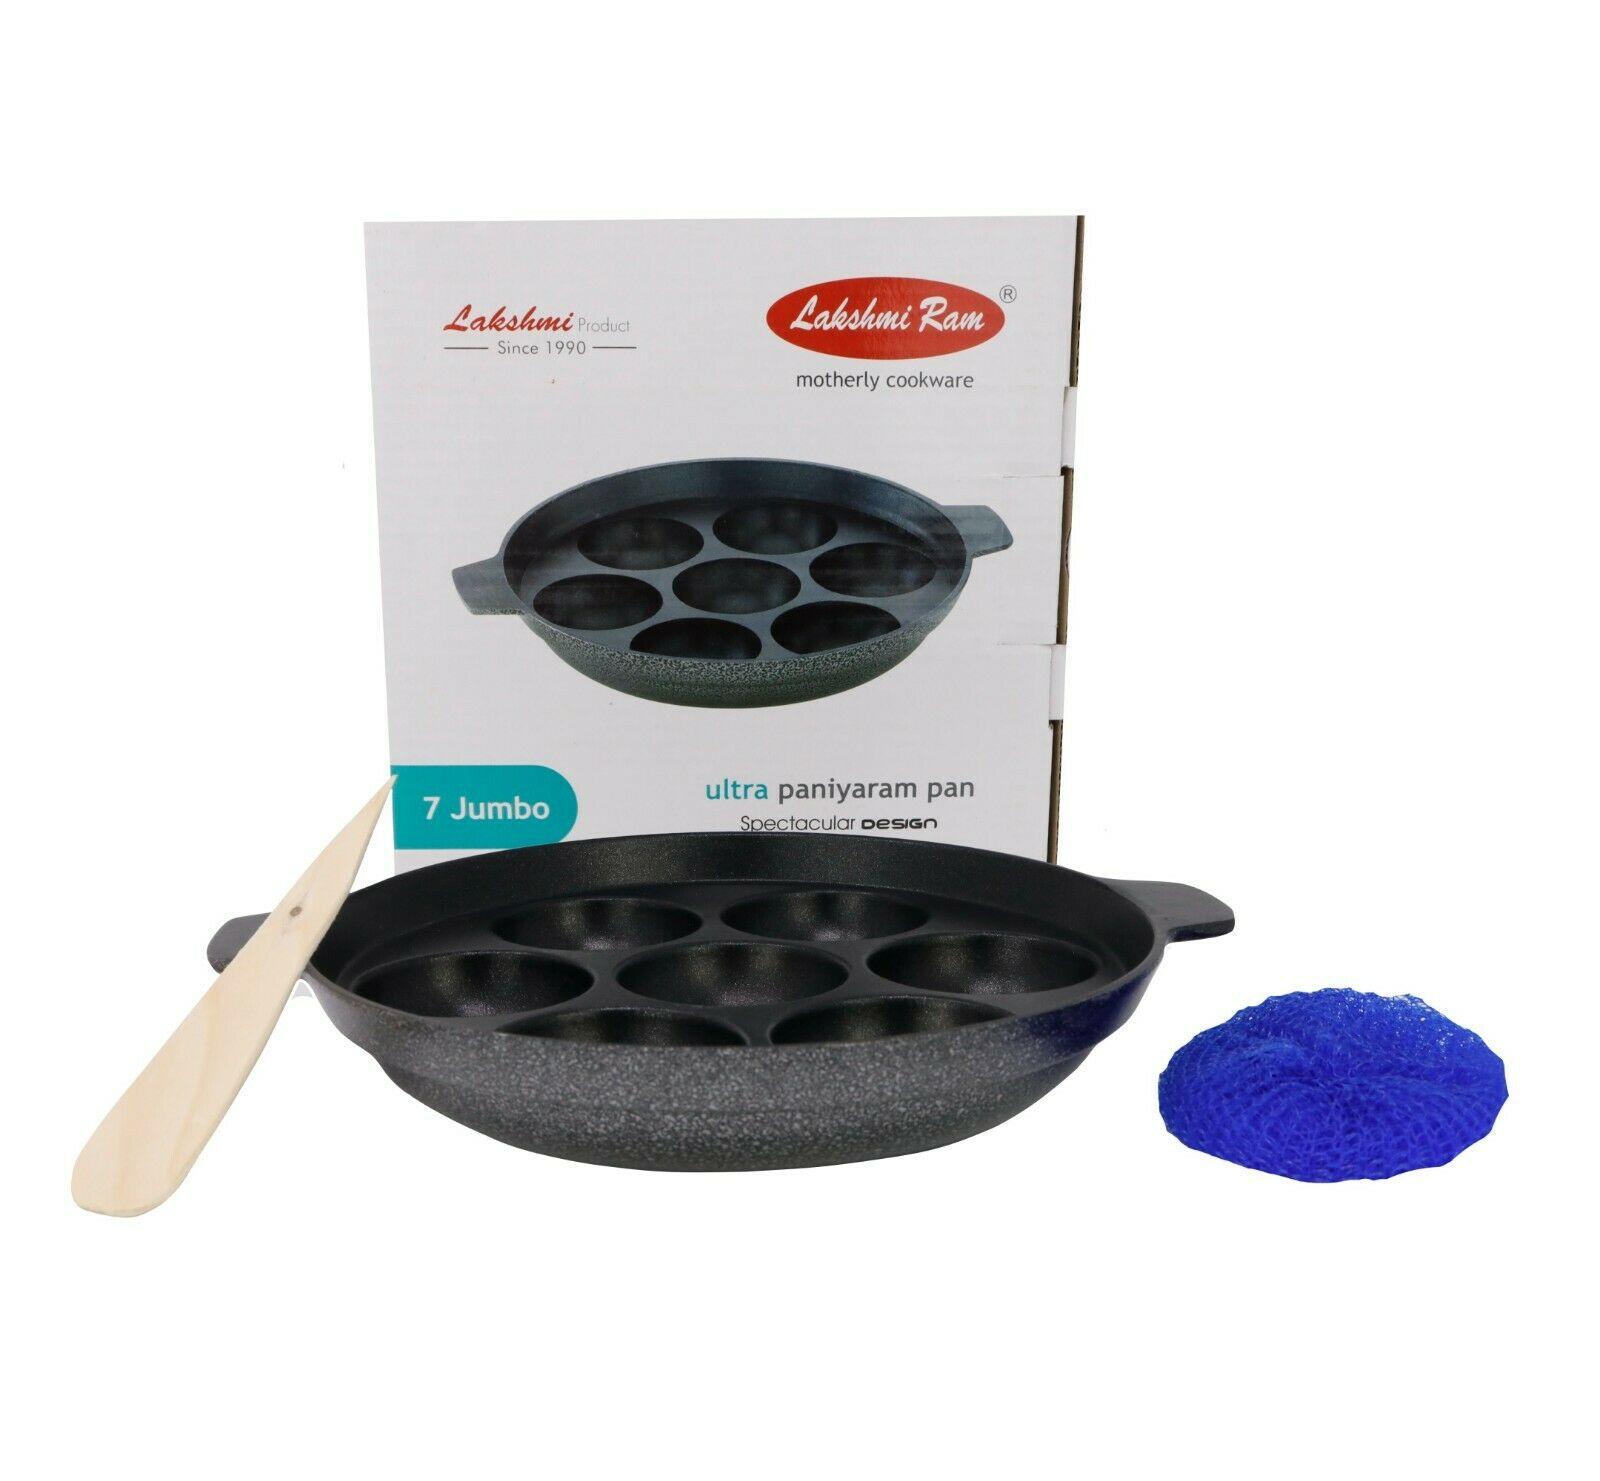 Mini Fry Pan,Nonstick Small 6.5 inch Skillet Mini Egg Omelette Pan Round Griddles Aluminum Cooker Pan Pancake Cookware 